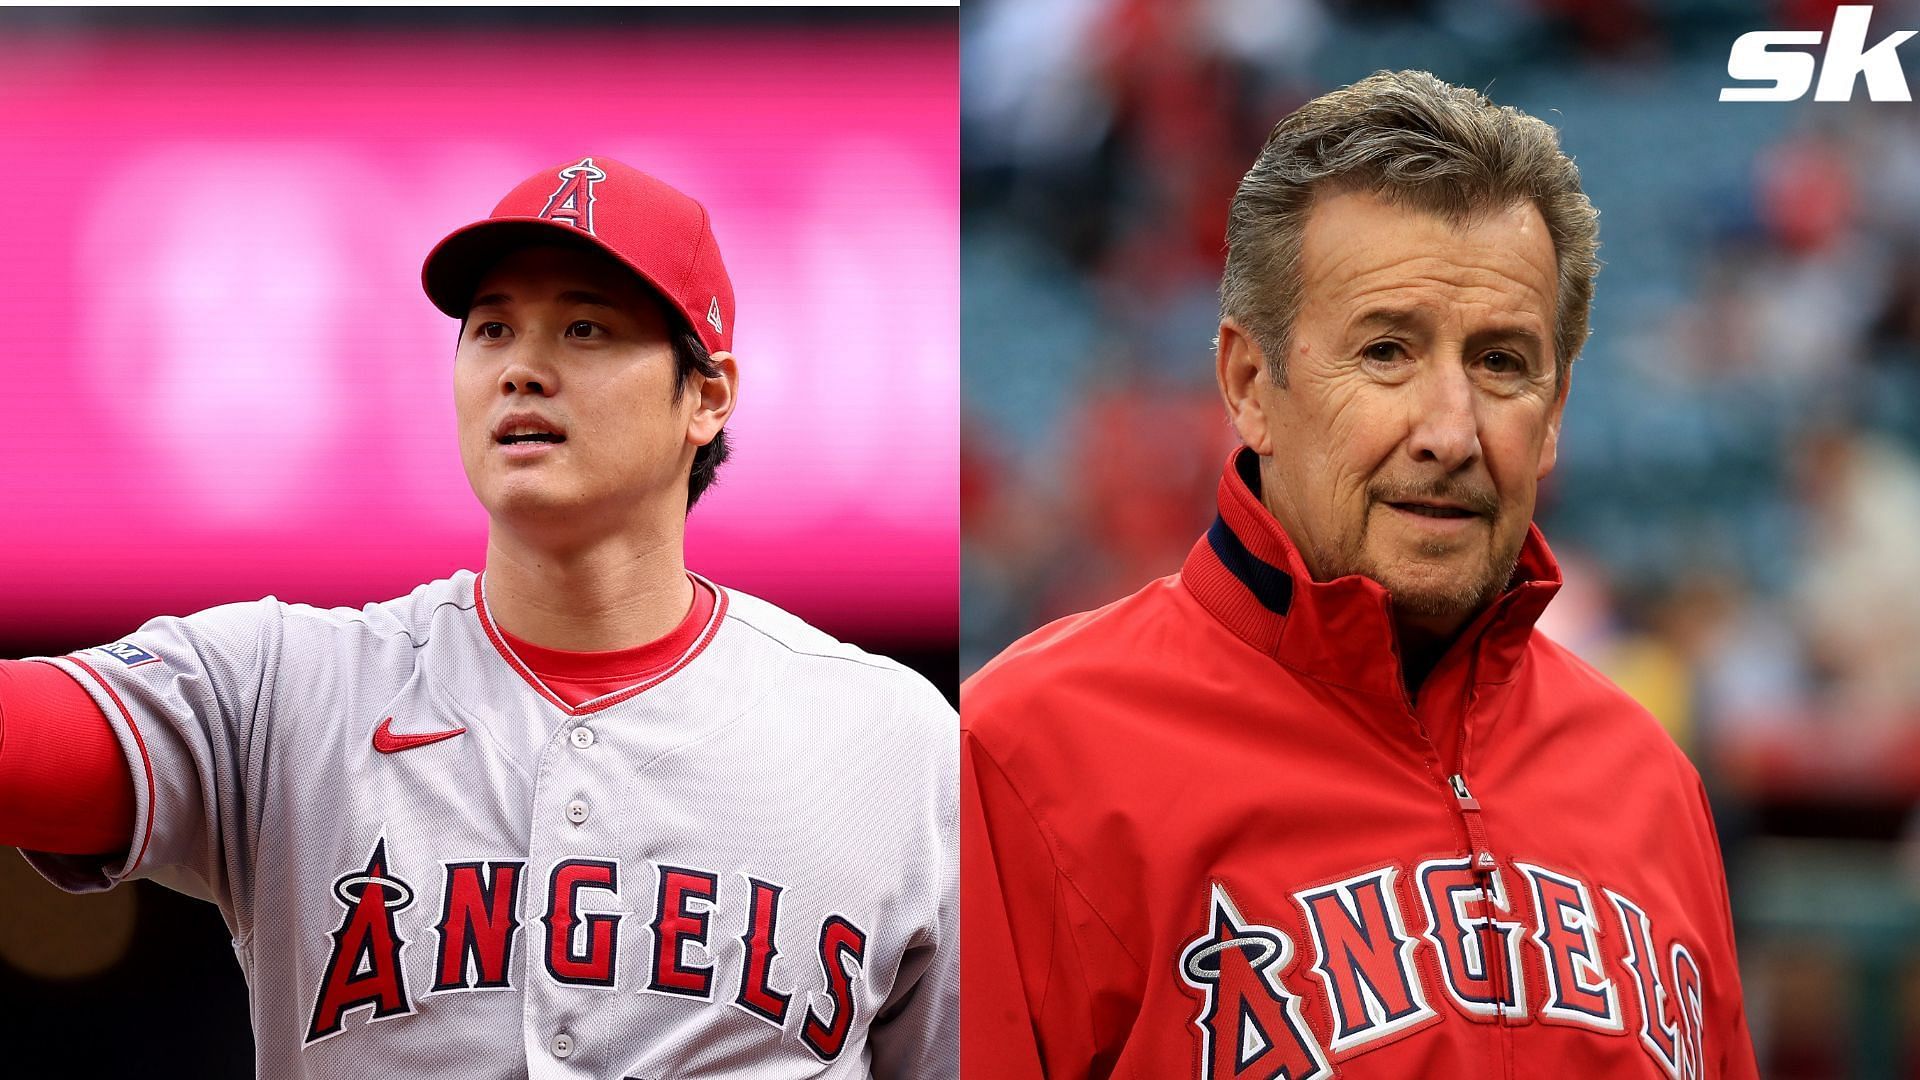 Los Angeles Angels owner Arte Moreno has shed some light on the Shohei Ohtani situation